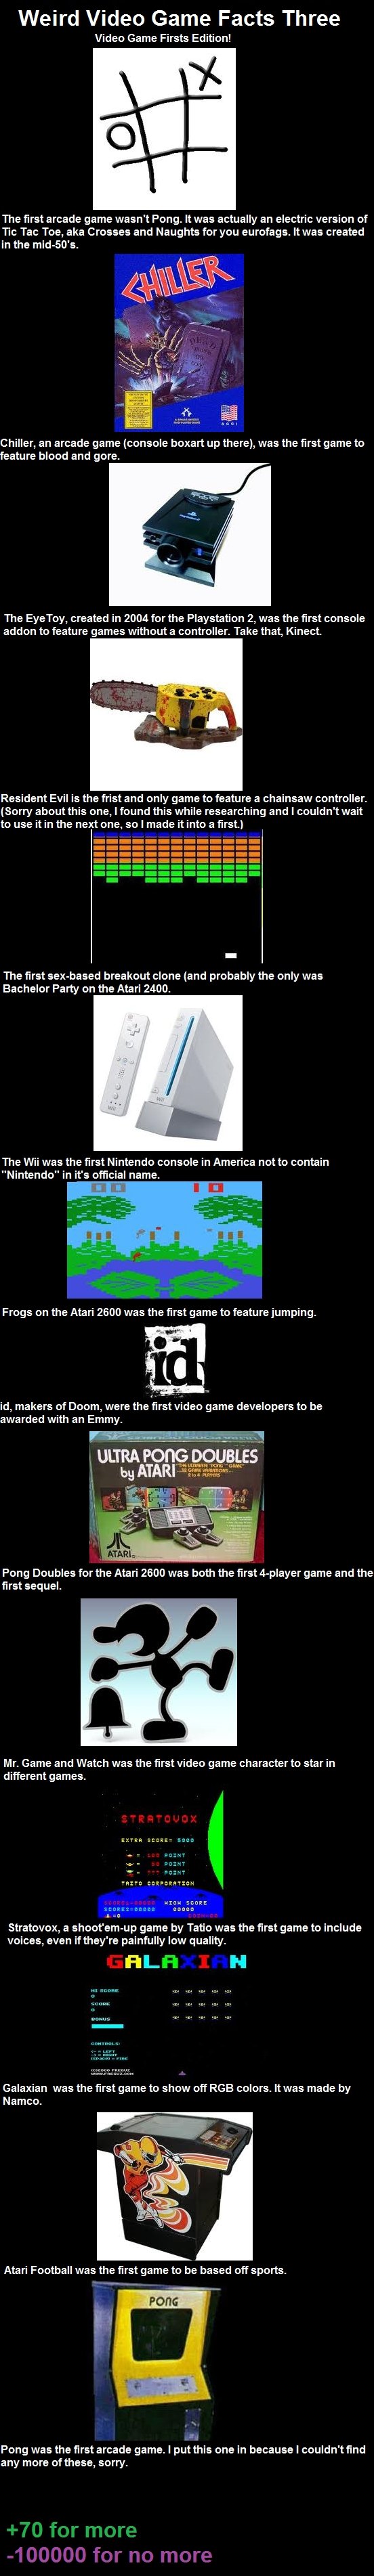 Weird Video Game Facts 3: Firsts Edition. OH MY GOD GUYS STOP COMPLAINING ABOUT THE &amp;quot;CROSSES AND NAUGHTS&amp;quot; AND &amp;quot;PONG WASN'T THE FIRST 